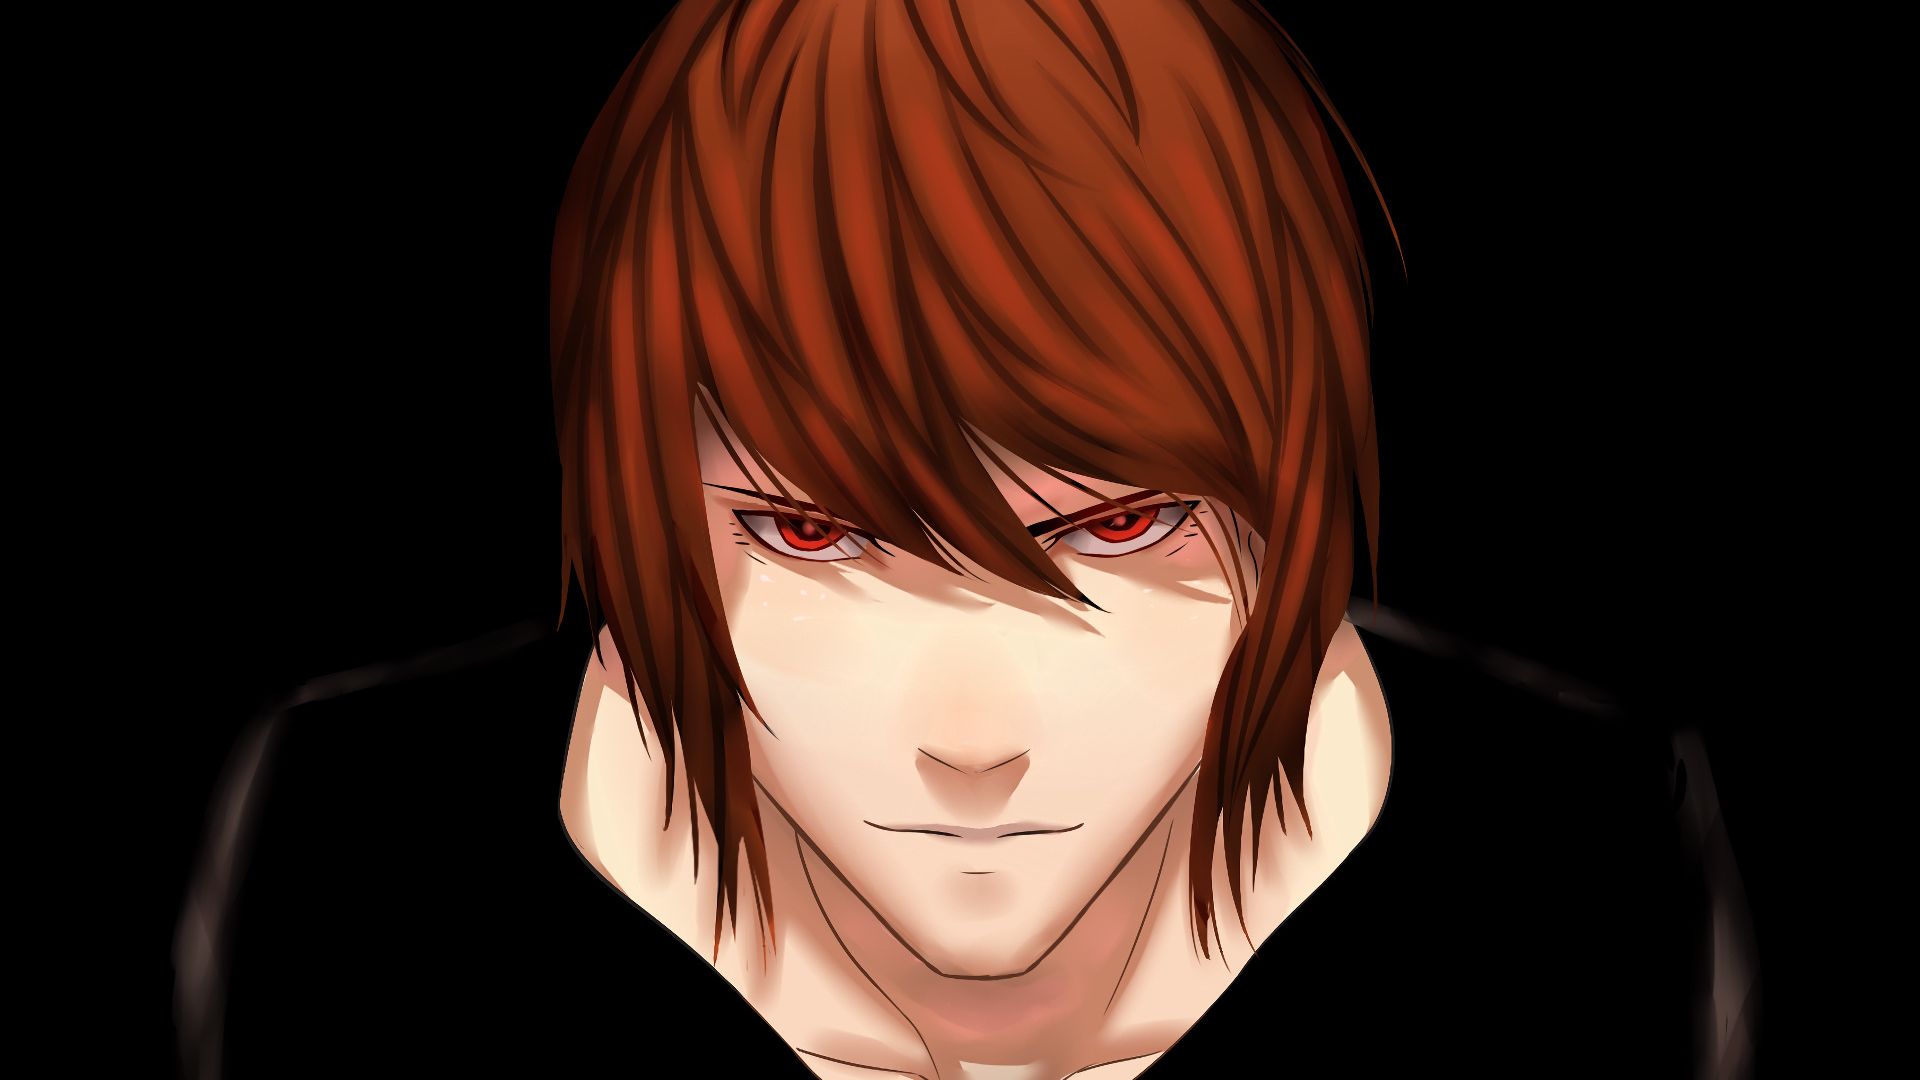 Desktop wallpaper light yagami, red head, anime boy, death note, HD image, picture, background, f42c80